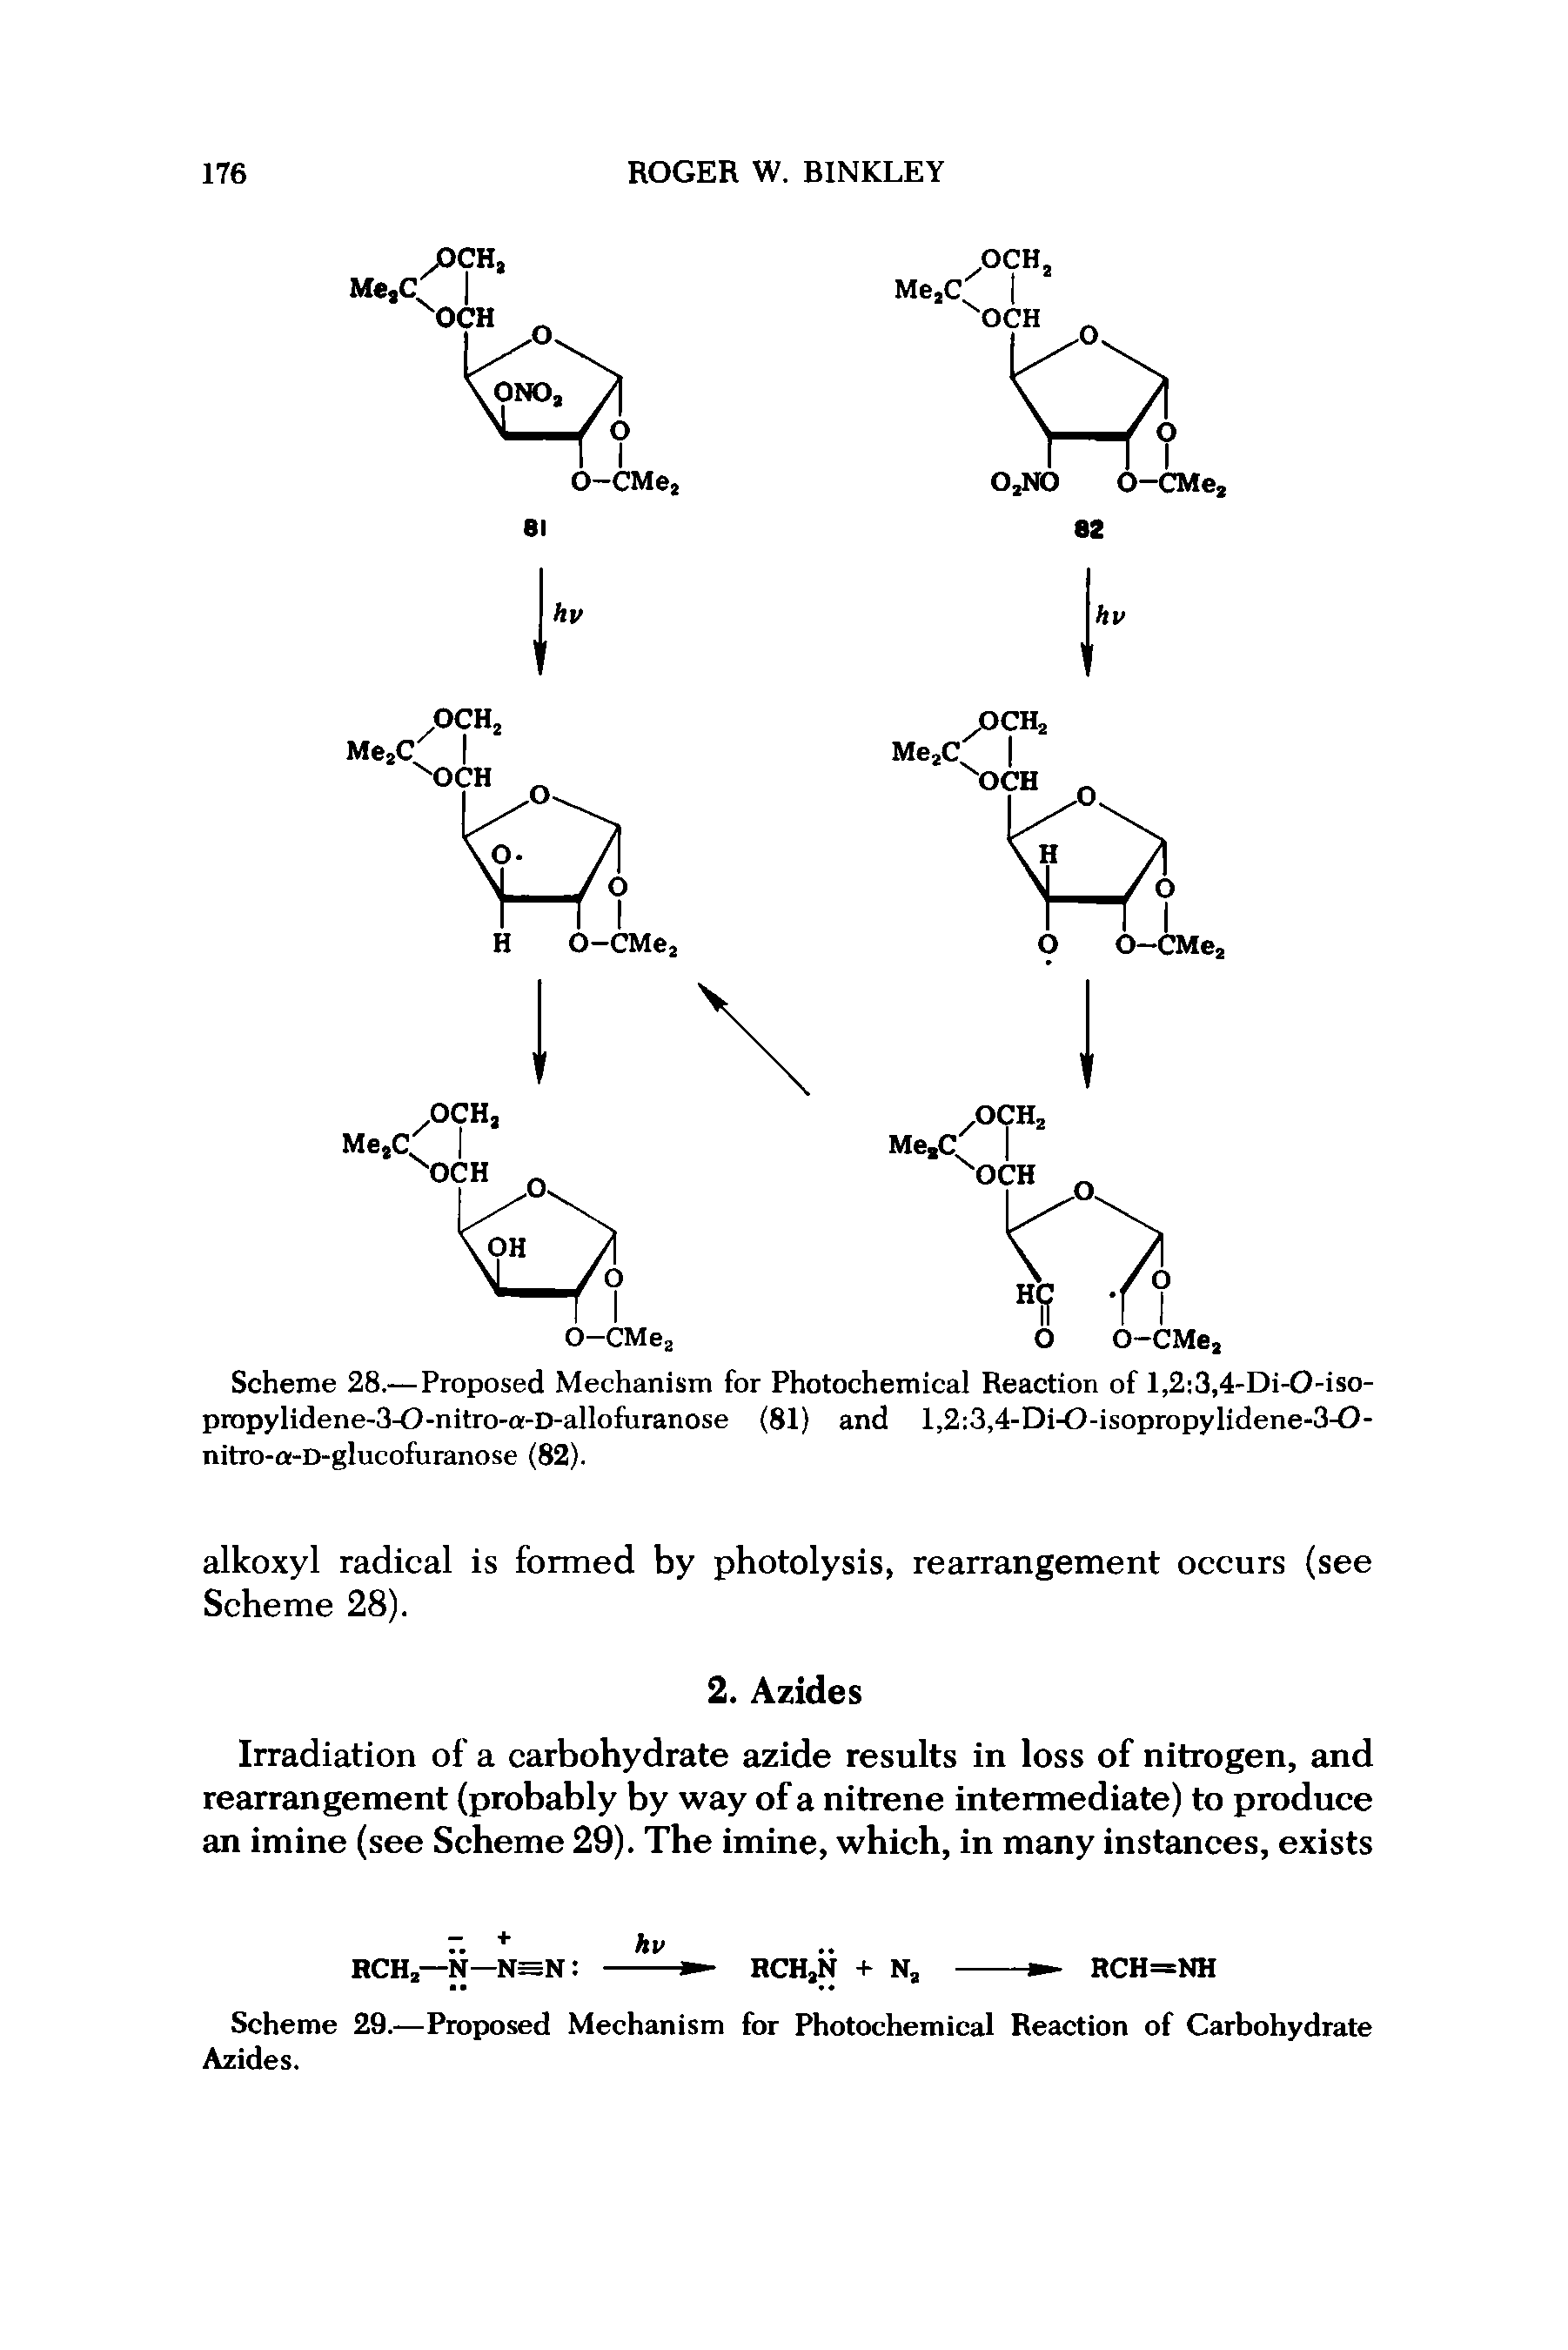 Scheme 29.—Proposed Mechanism for Photochemical Reaction of Carbohydrate Azides.